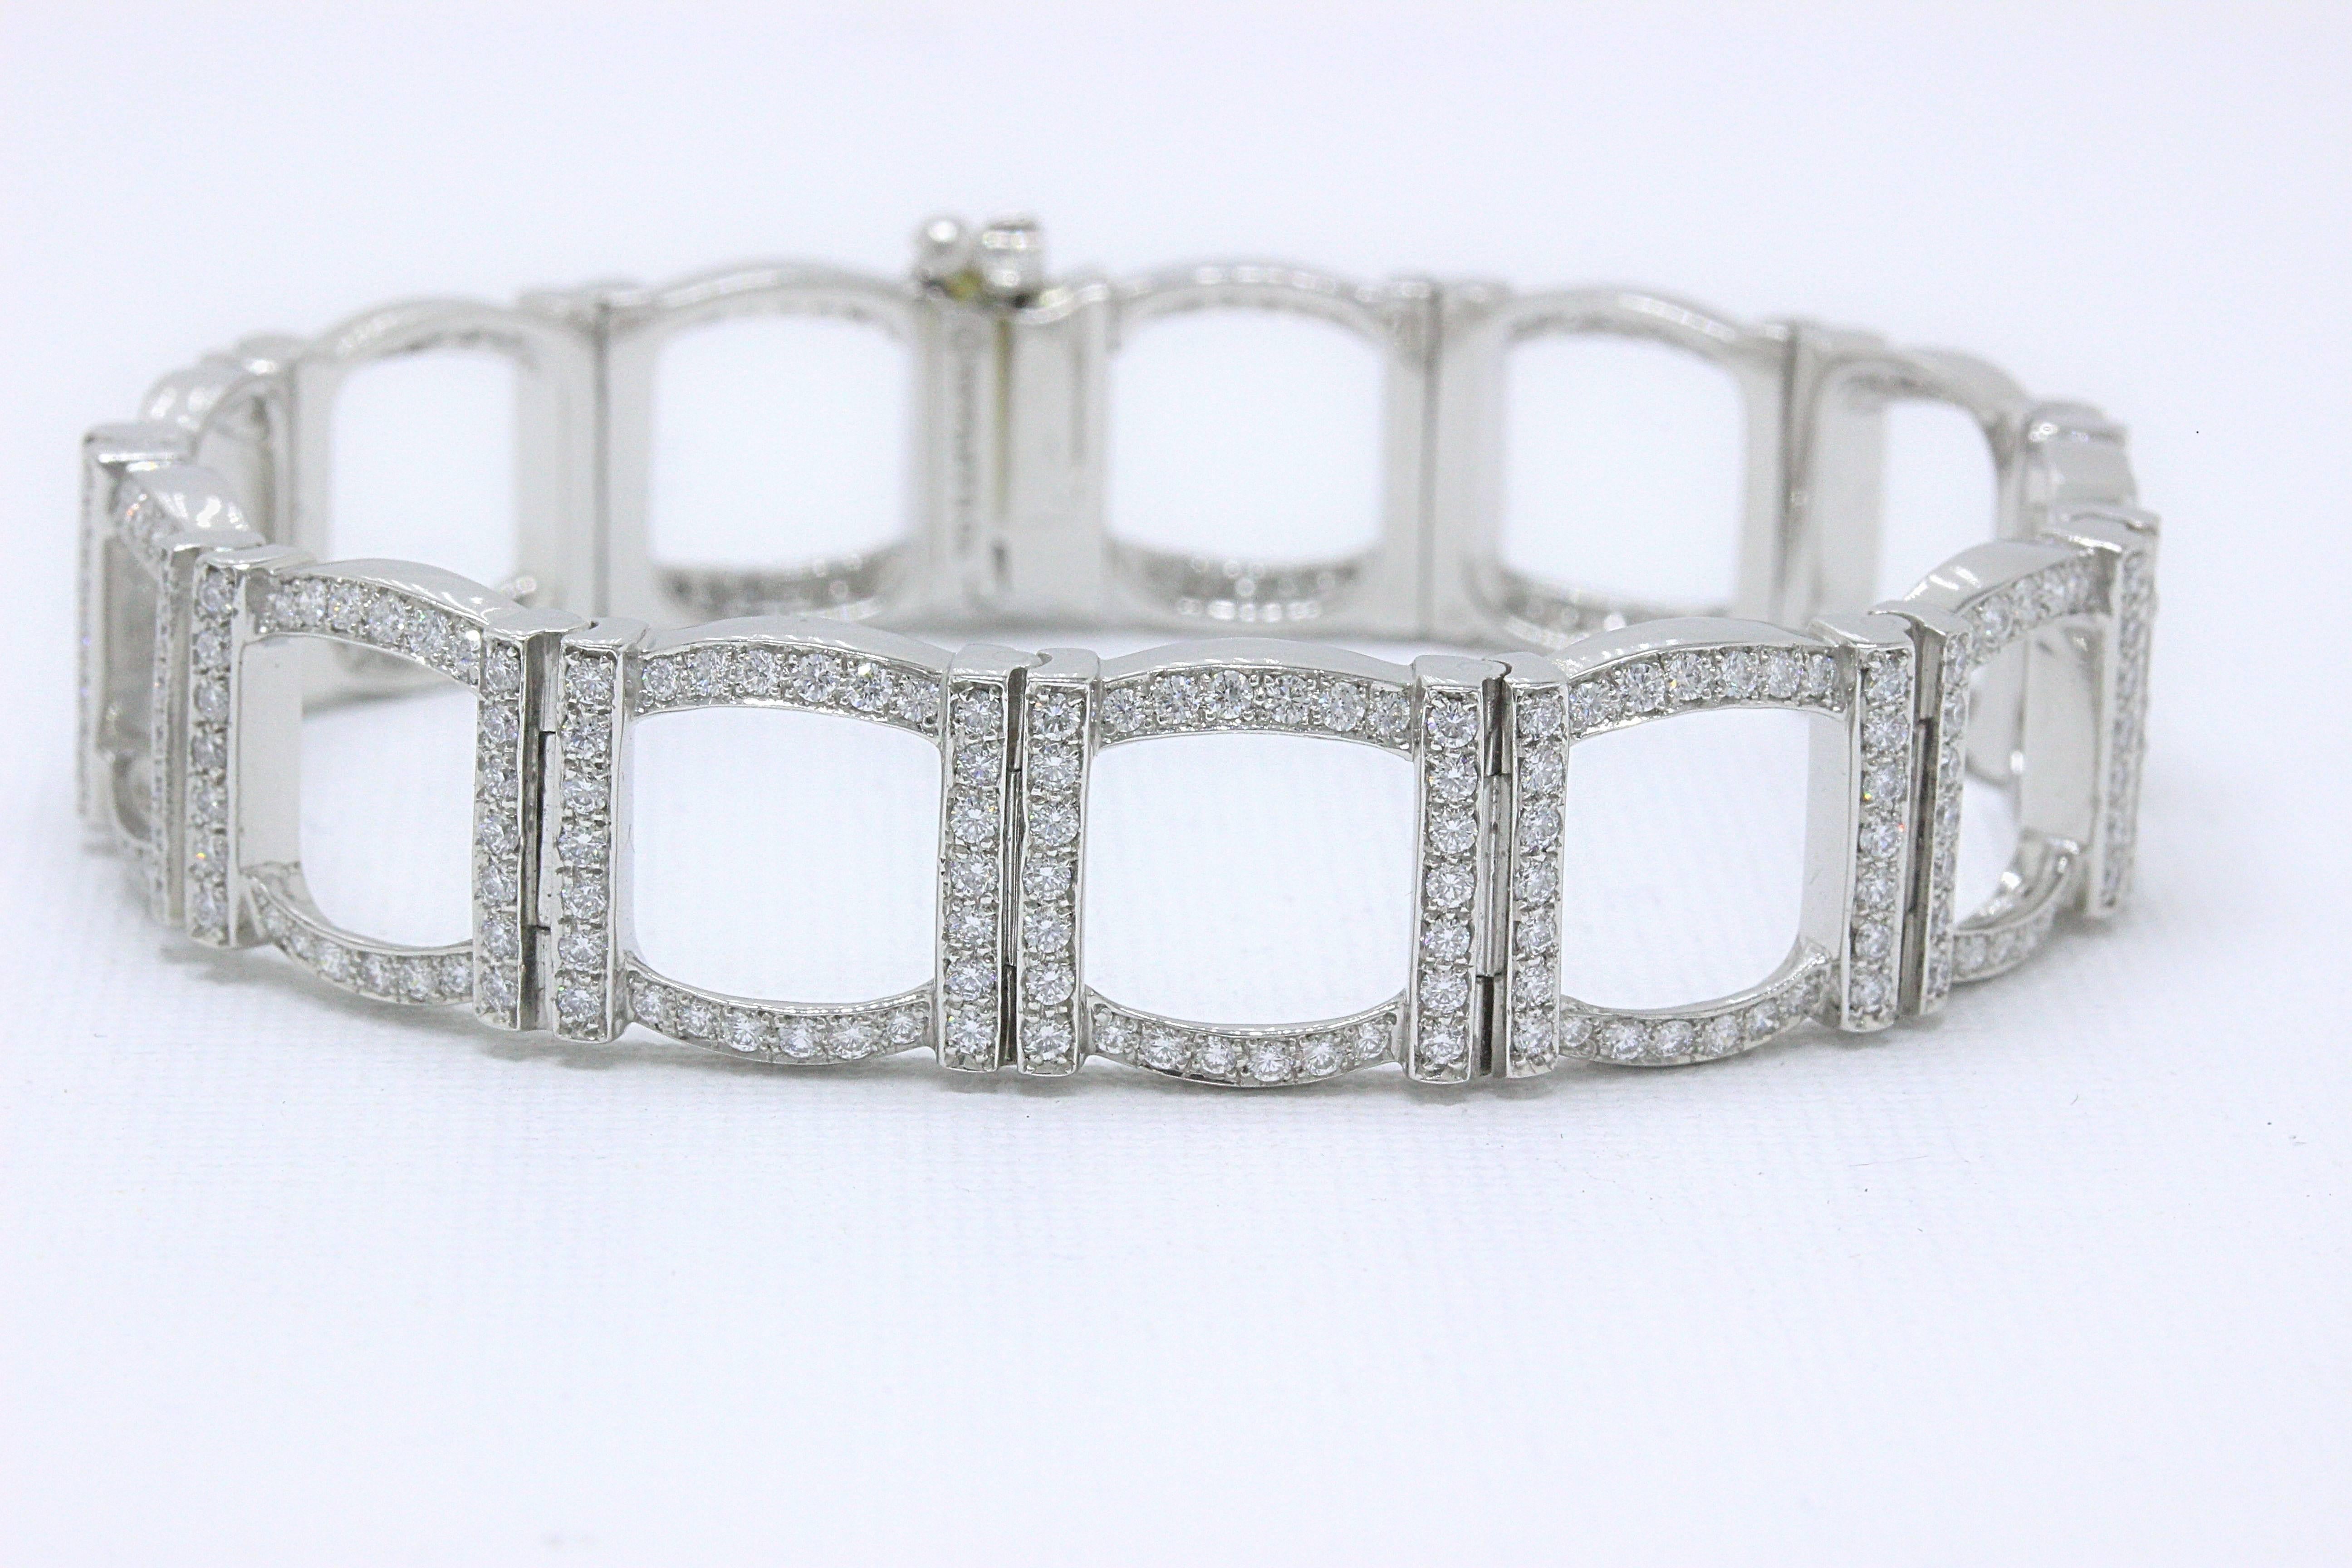 Tiffany & Co. Diamond and Platinum Open Square Link Bracelet Rounds 4.00 TCW 7